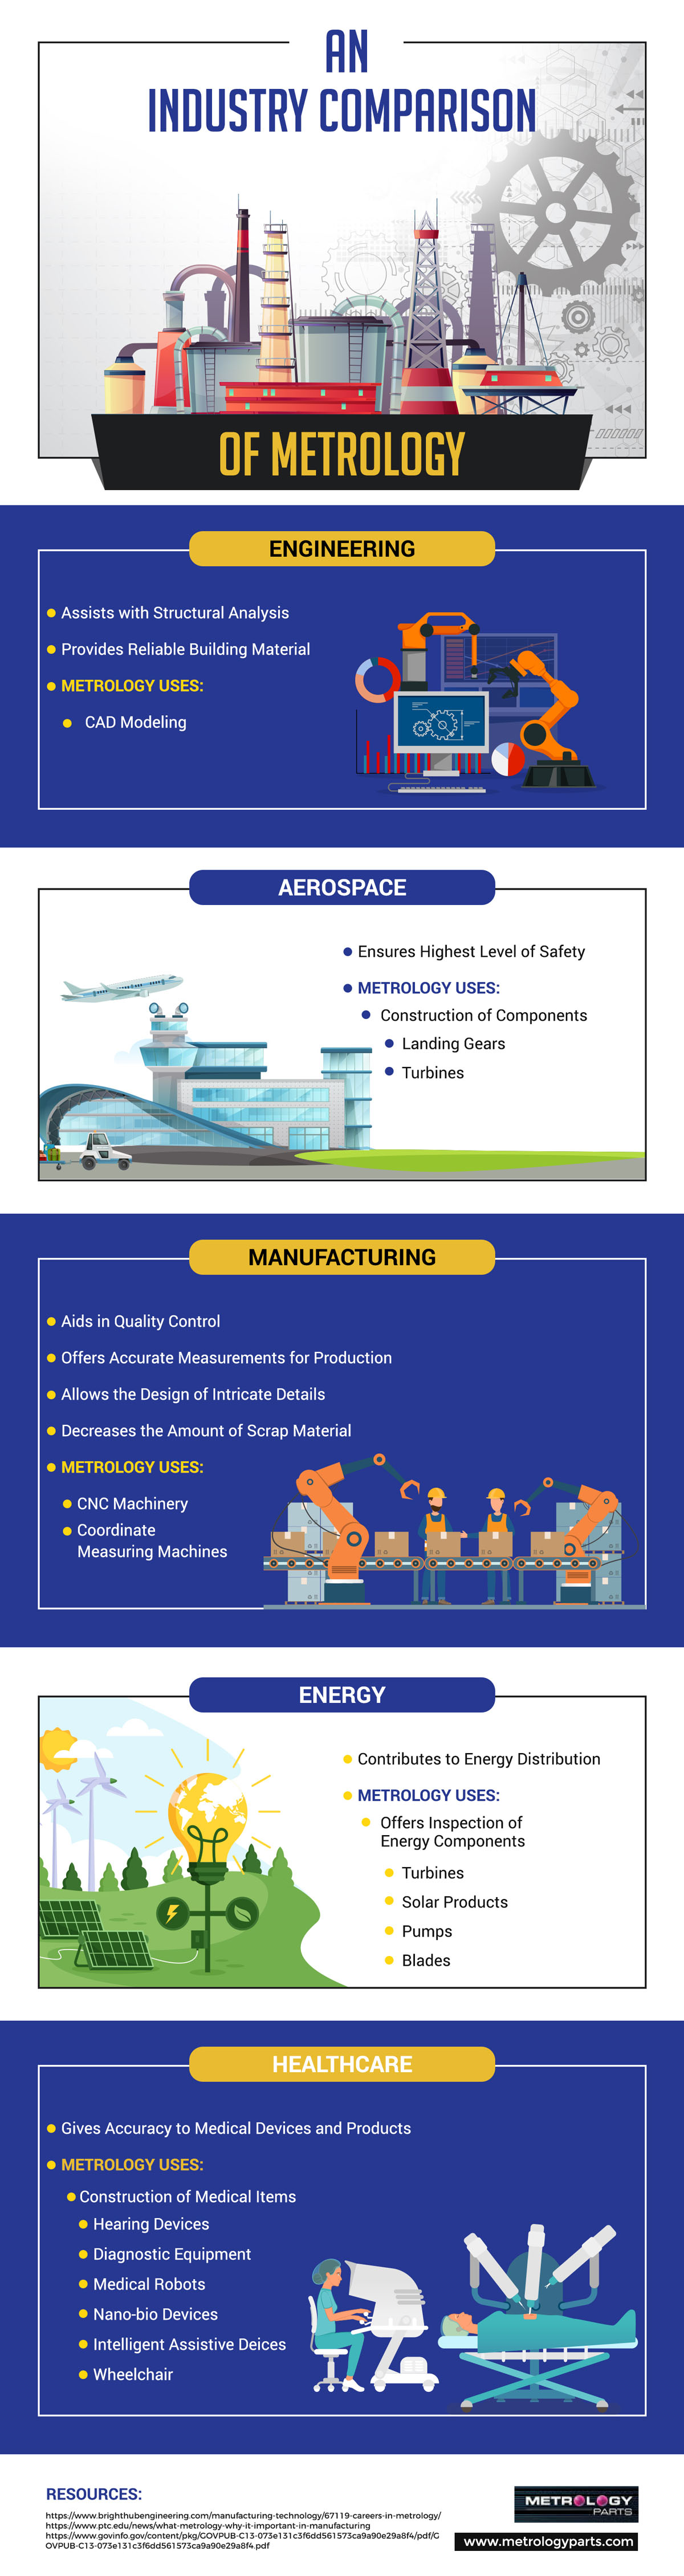 An Industry Comparison of Metrology